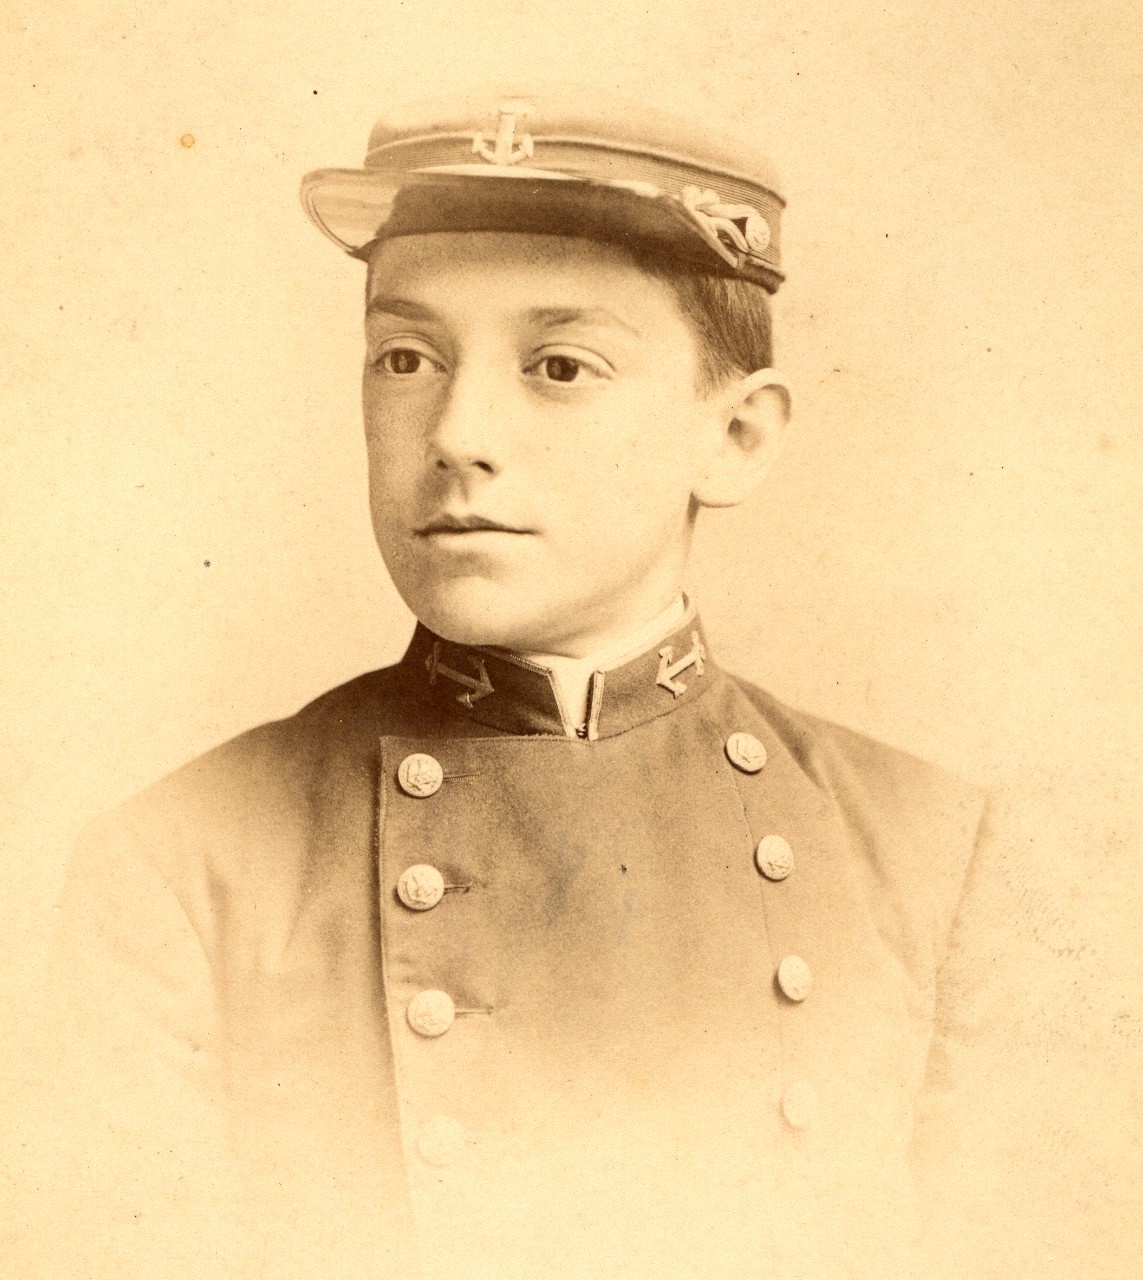 98 photographs and cabinet cards related to the United States Naval Academy in the 1880s and 1890s. Good views of the grounds and buildings, and many excellent views of midshipmen. Names are handwritten and often difficult to make out.